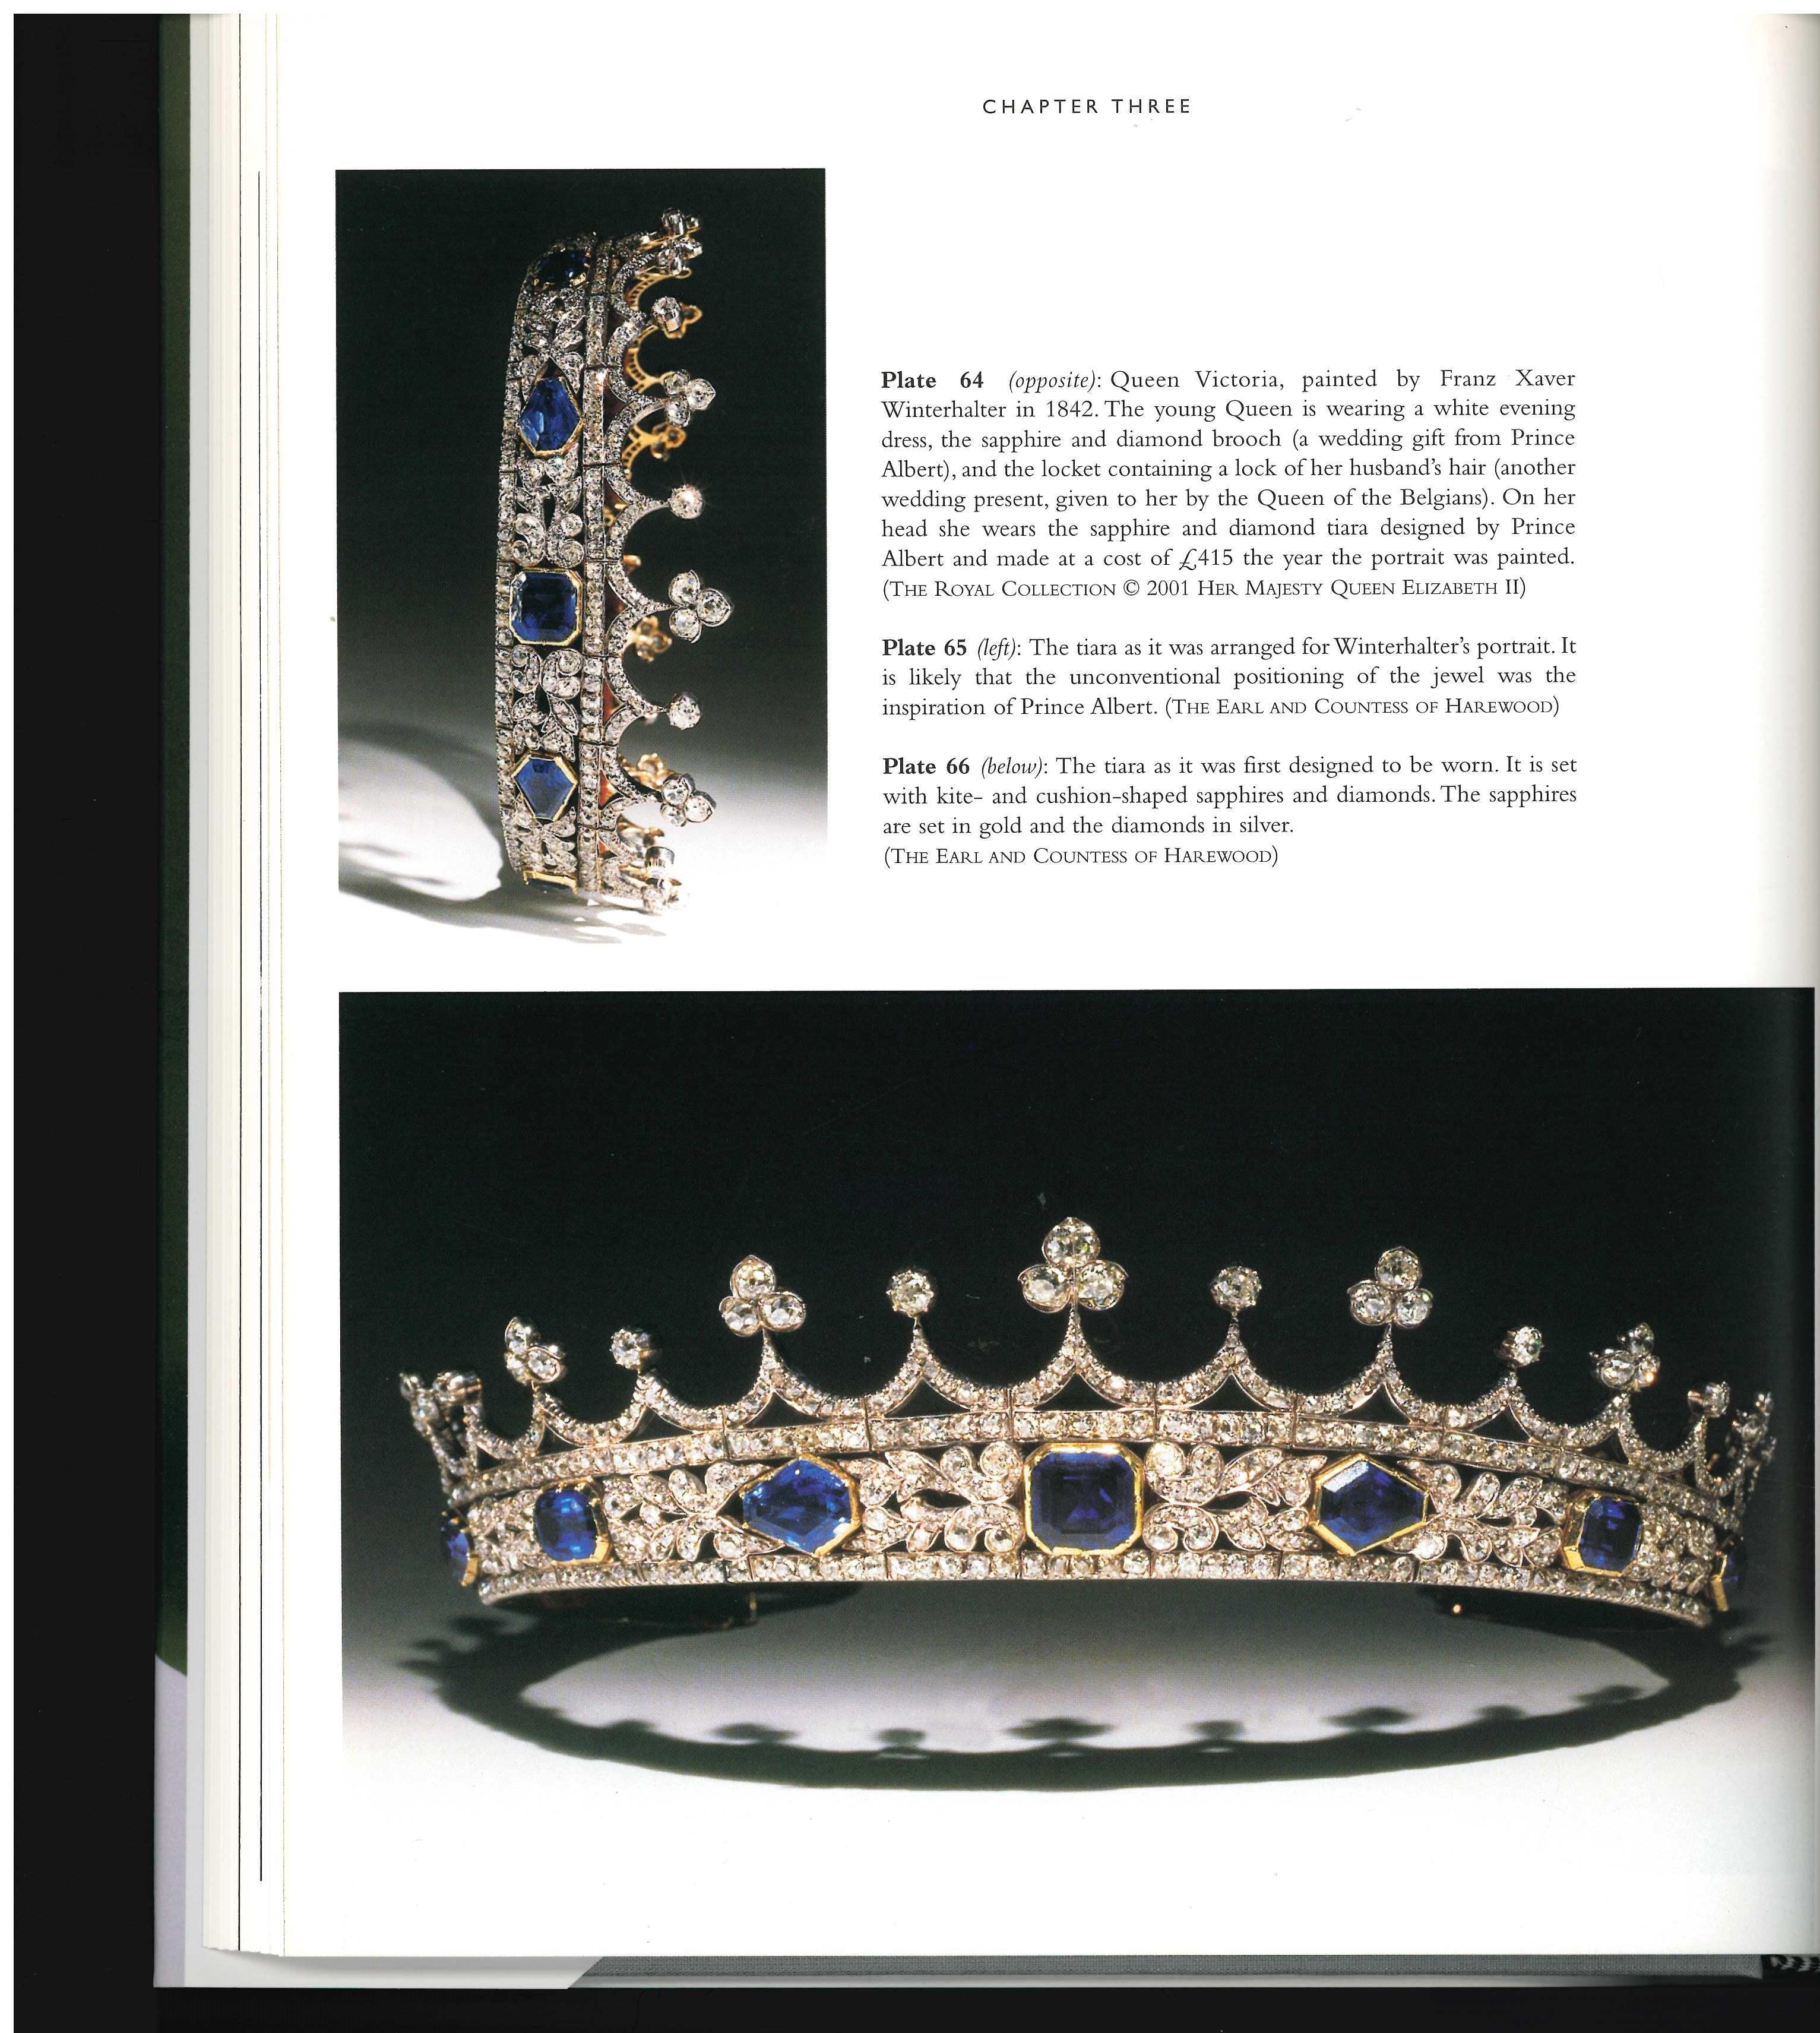 This lavishly illustrated book includes exclusive photographs, many reproduced in this book for the first time, of a variety of Royal Tiara's together with those of French and Russian Imperial provenance, including four stunning tiaras designed by